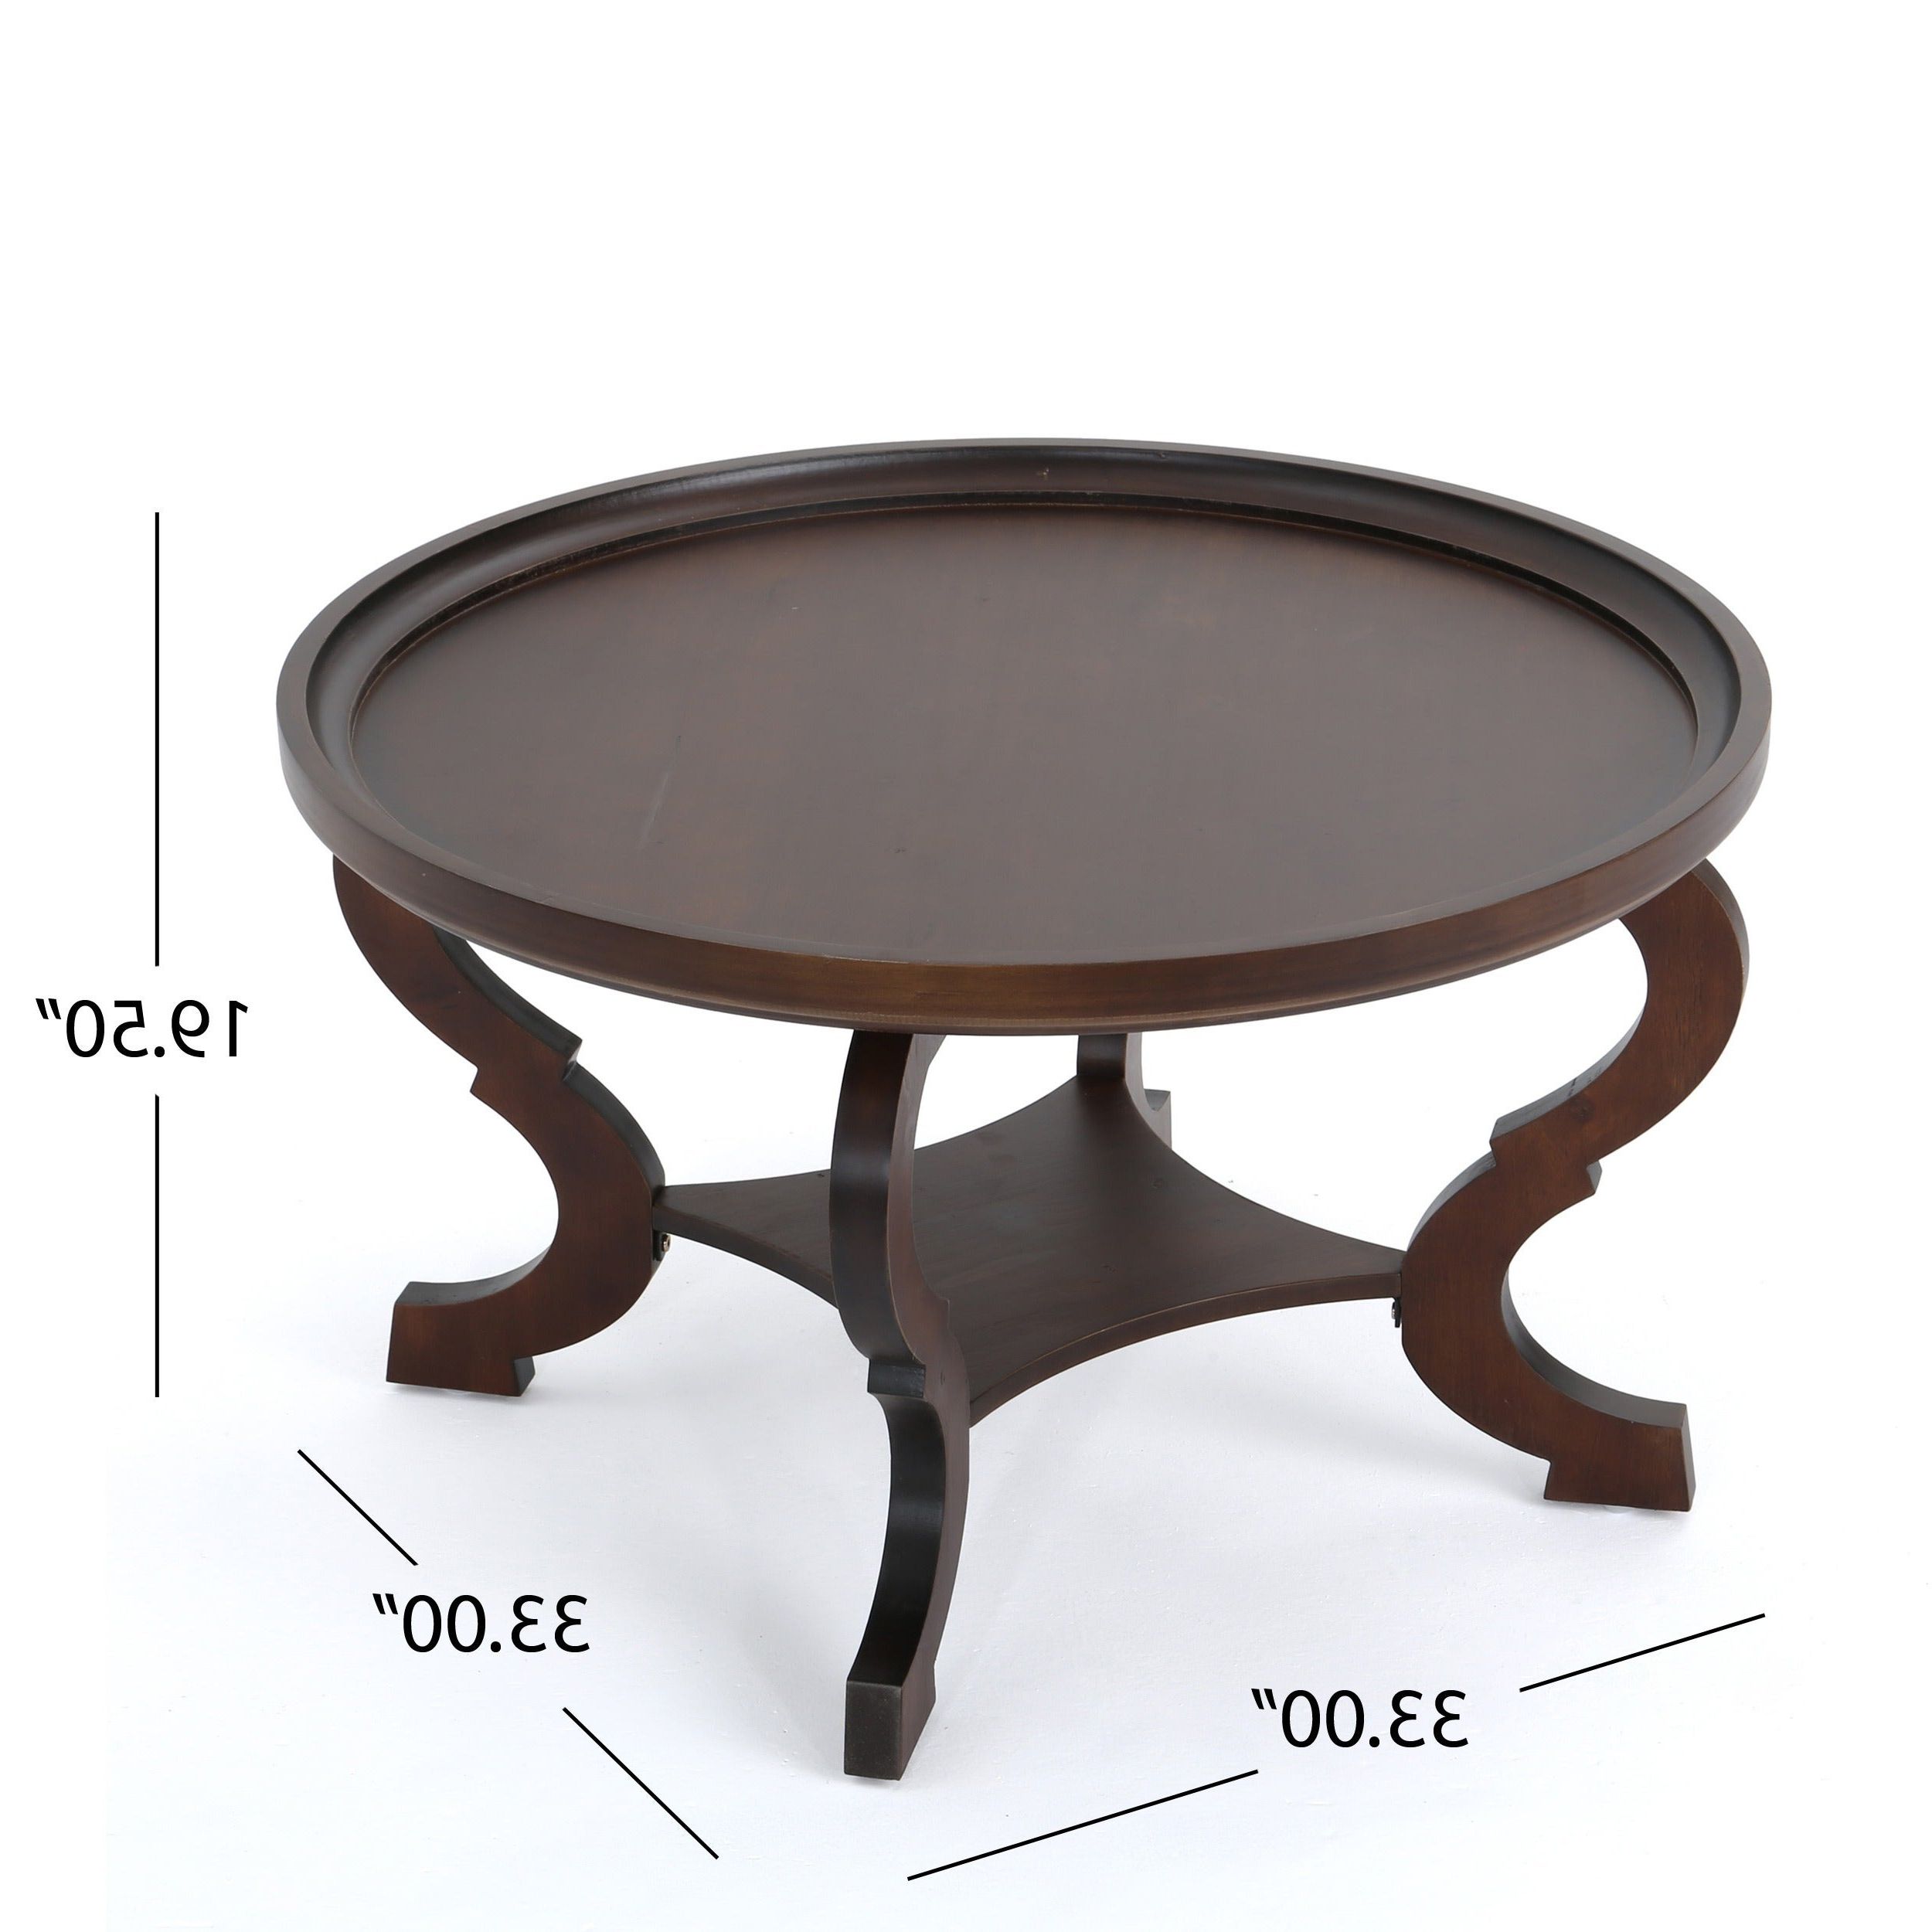 Althea Round Wood Coffee Tablechristopher Knight Home Intended For Well Known Copper Grove Halesia Chocolate Bronze Round Coffee Tables (View 18 of 20)